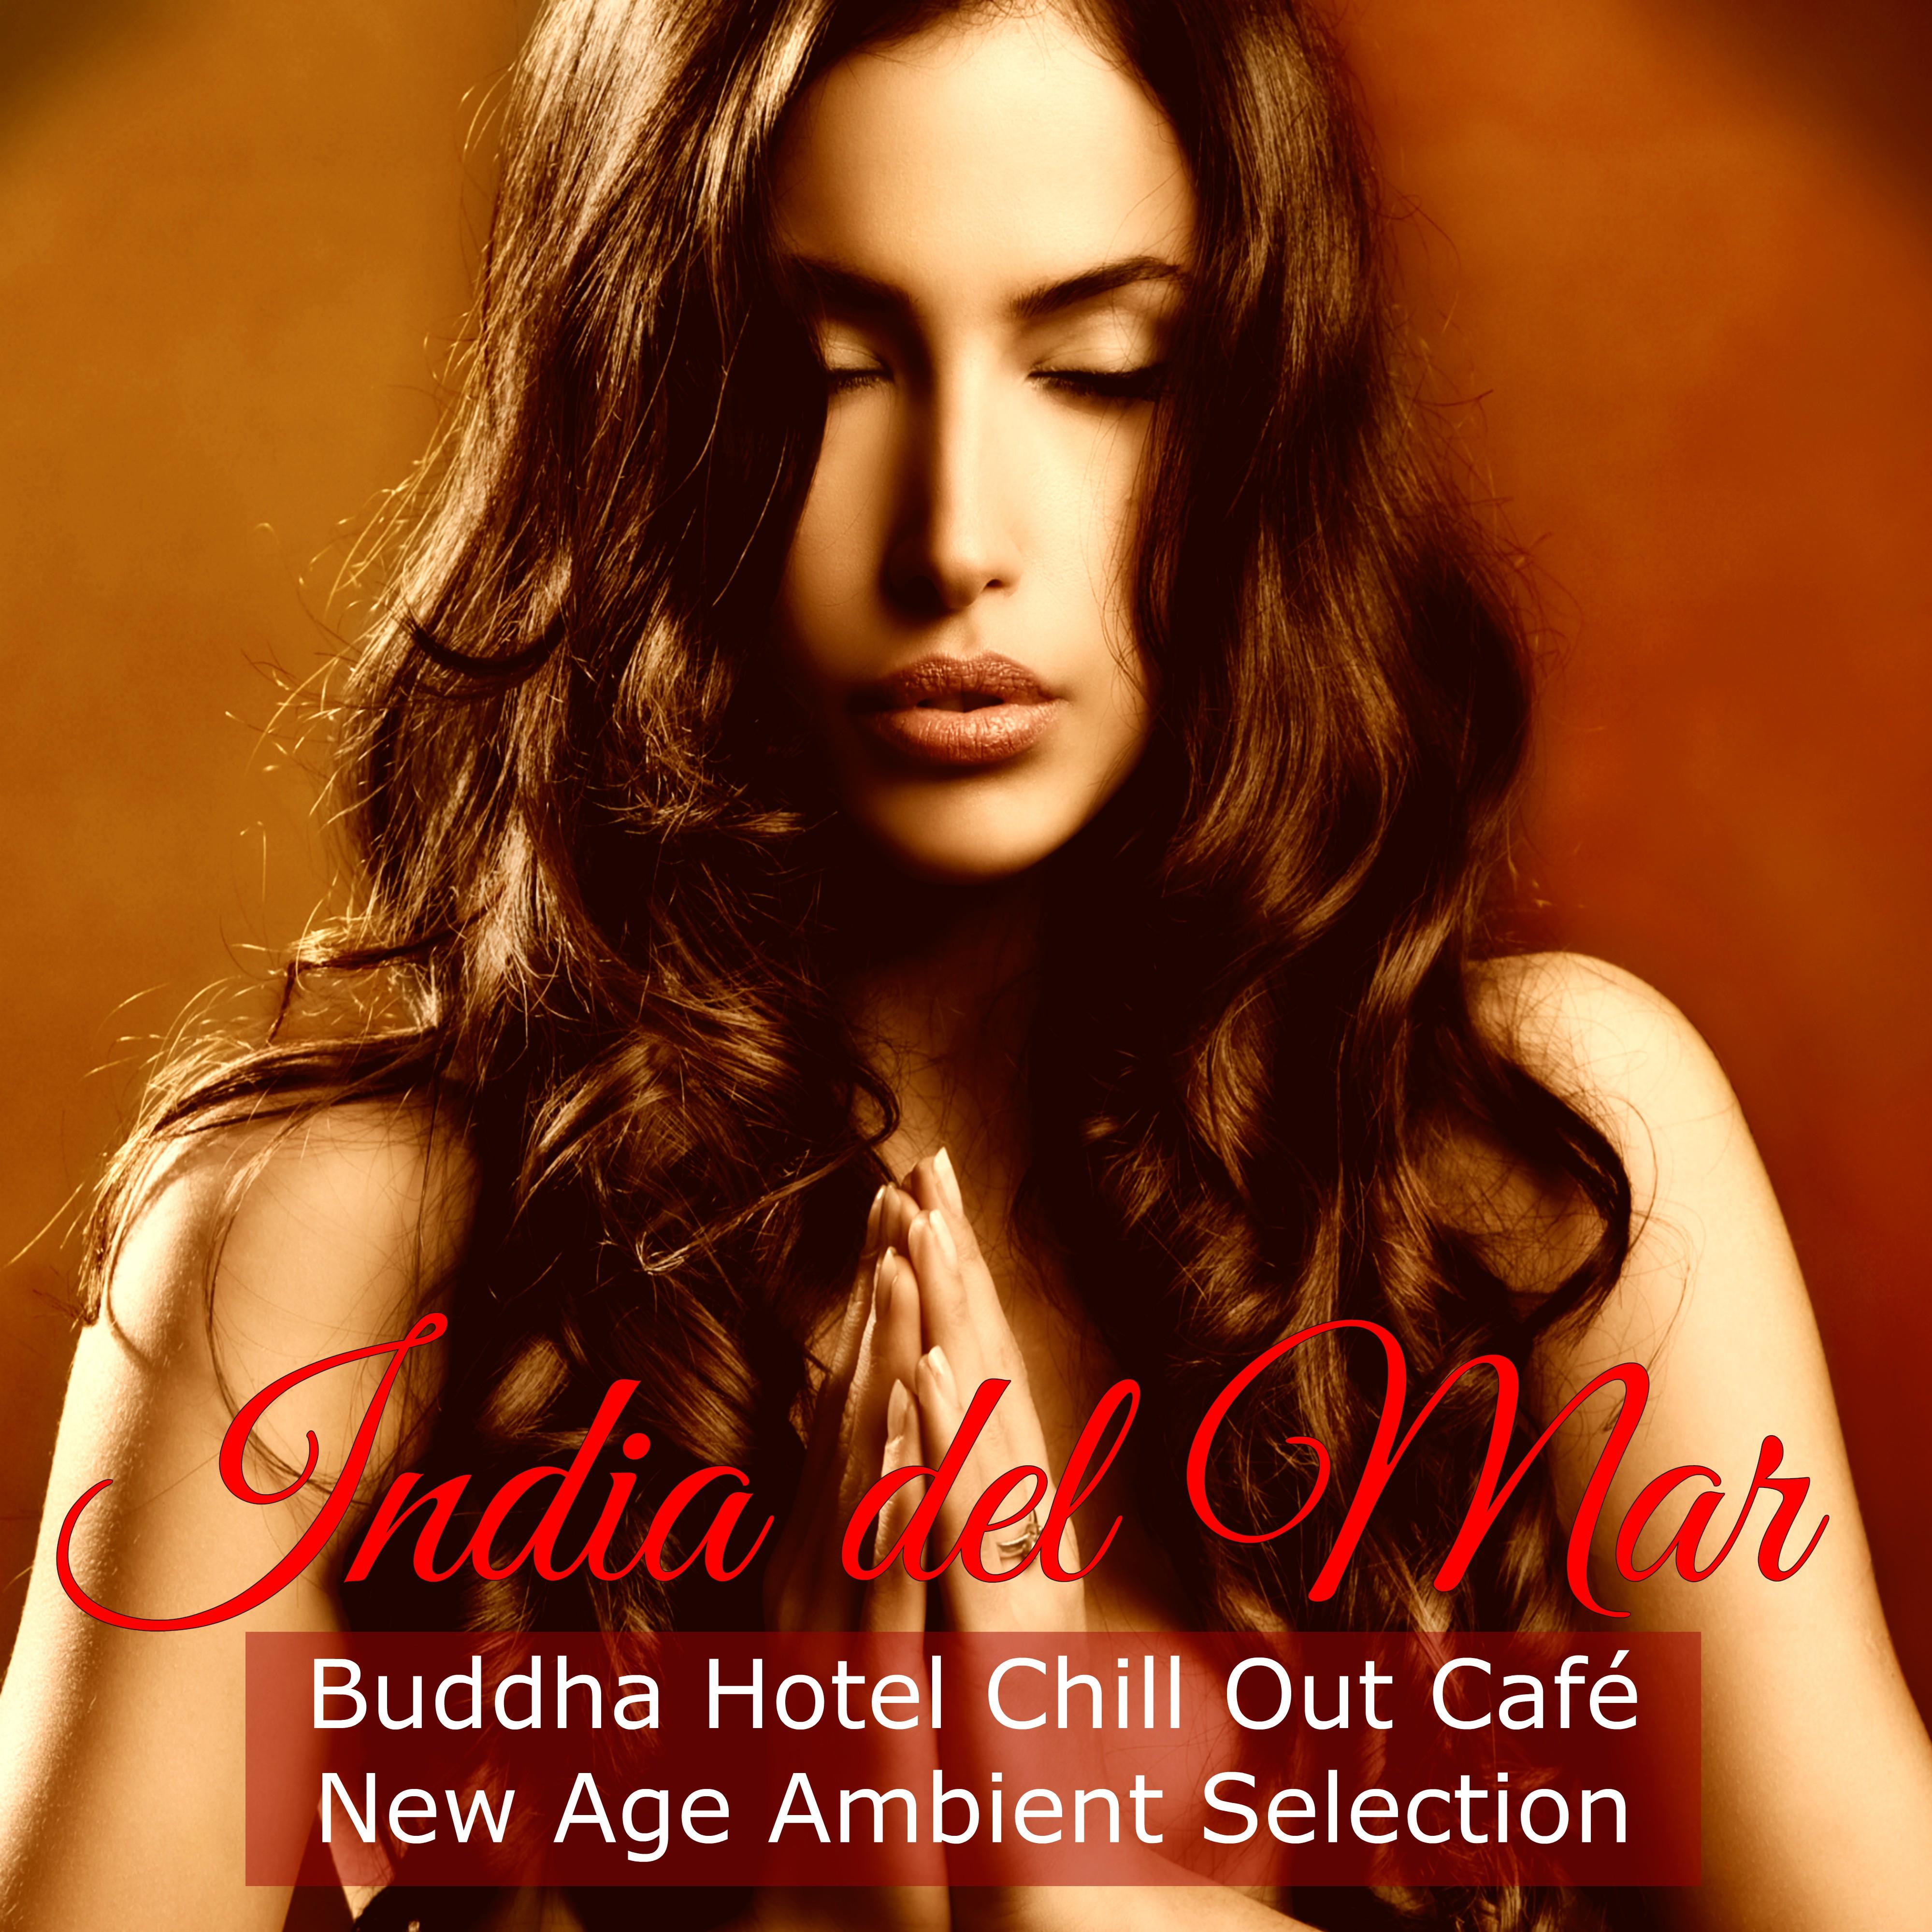 India del Mar Buddha Hotel Chill Out Cafe New Age Ambient Selection